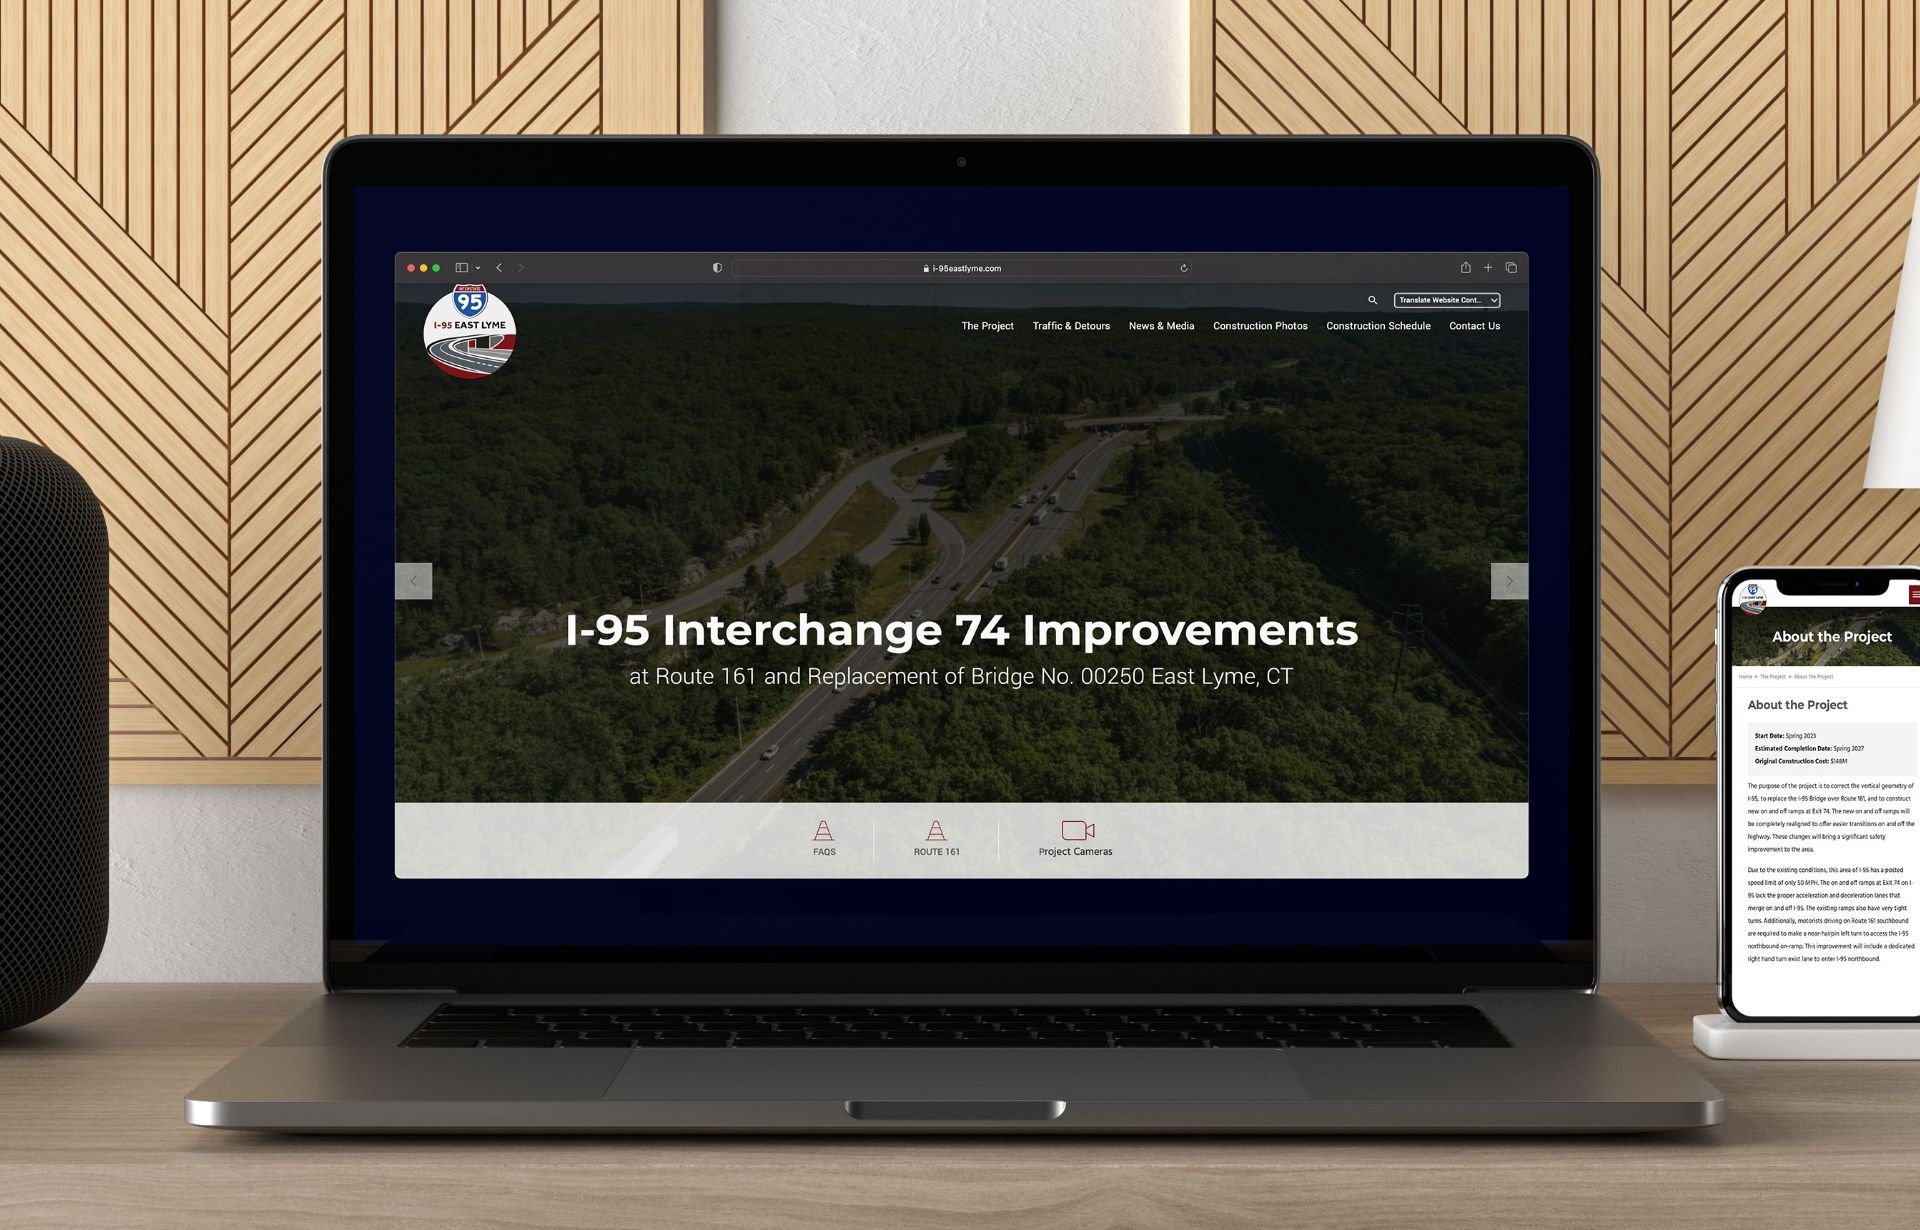 GM2 Launches New Website for I-95 East Lyme Project